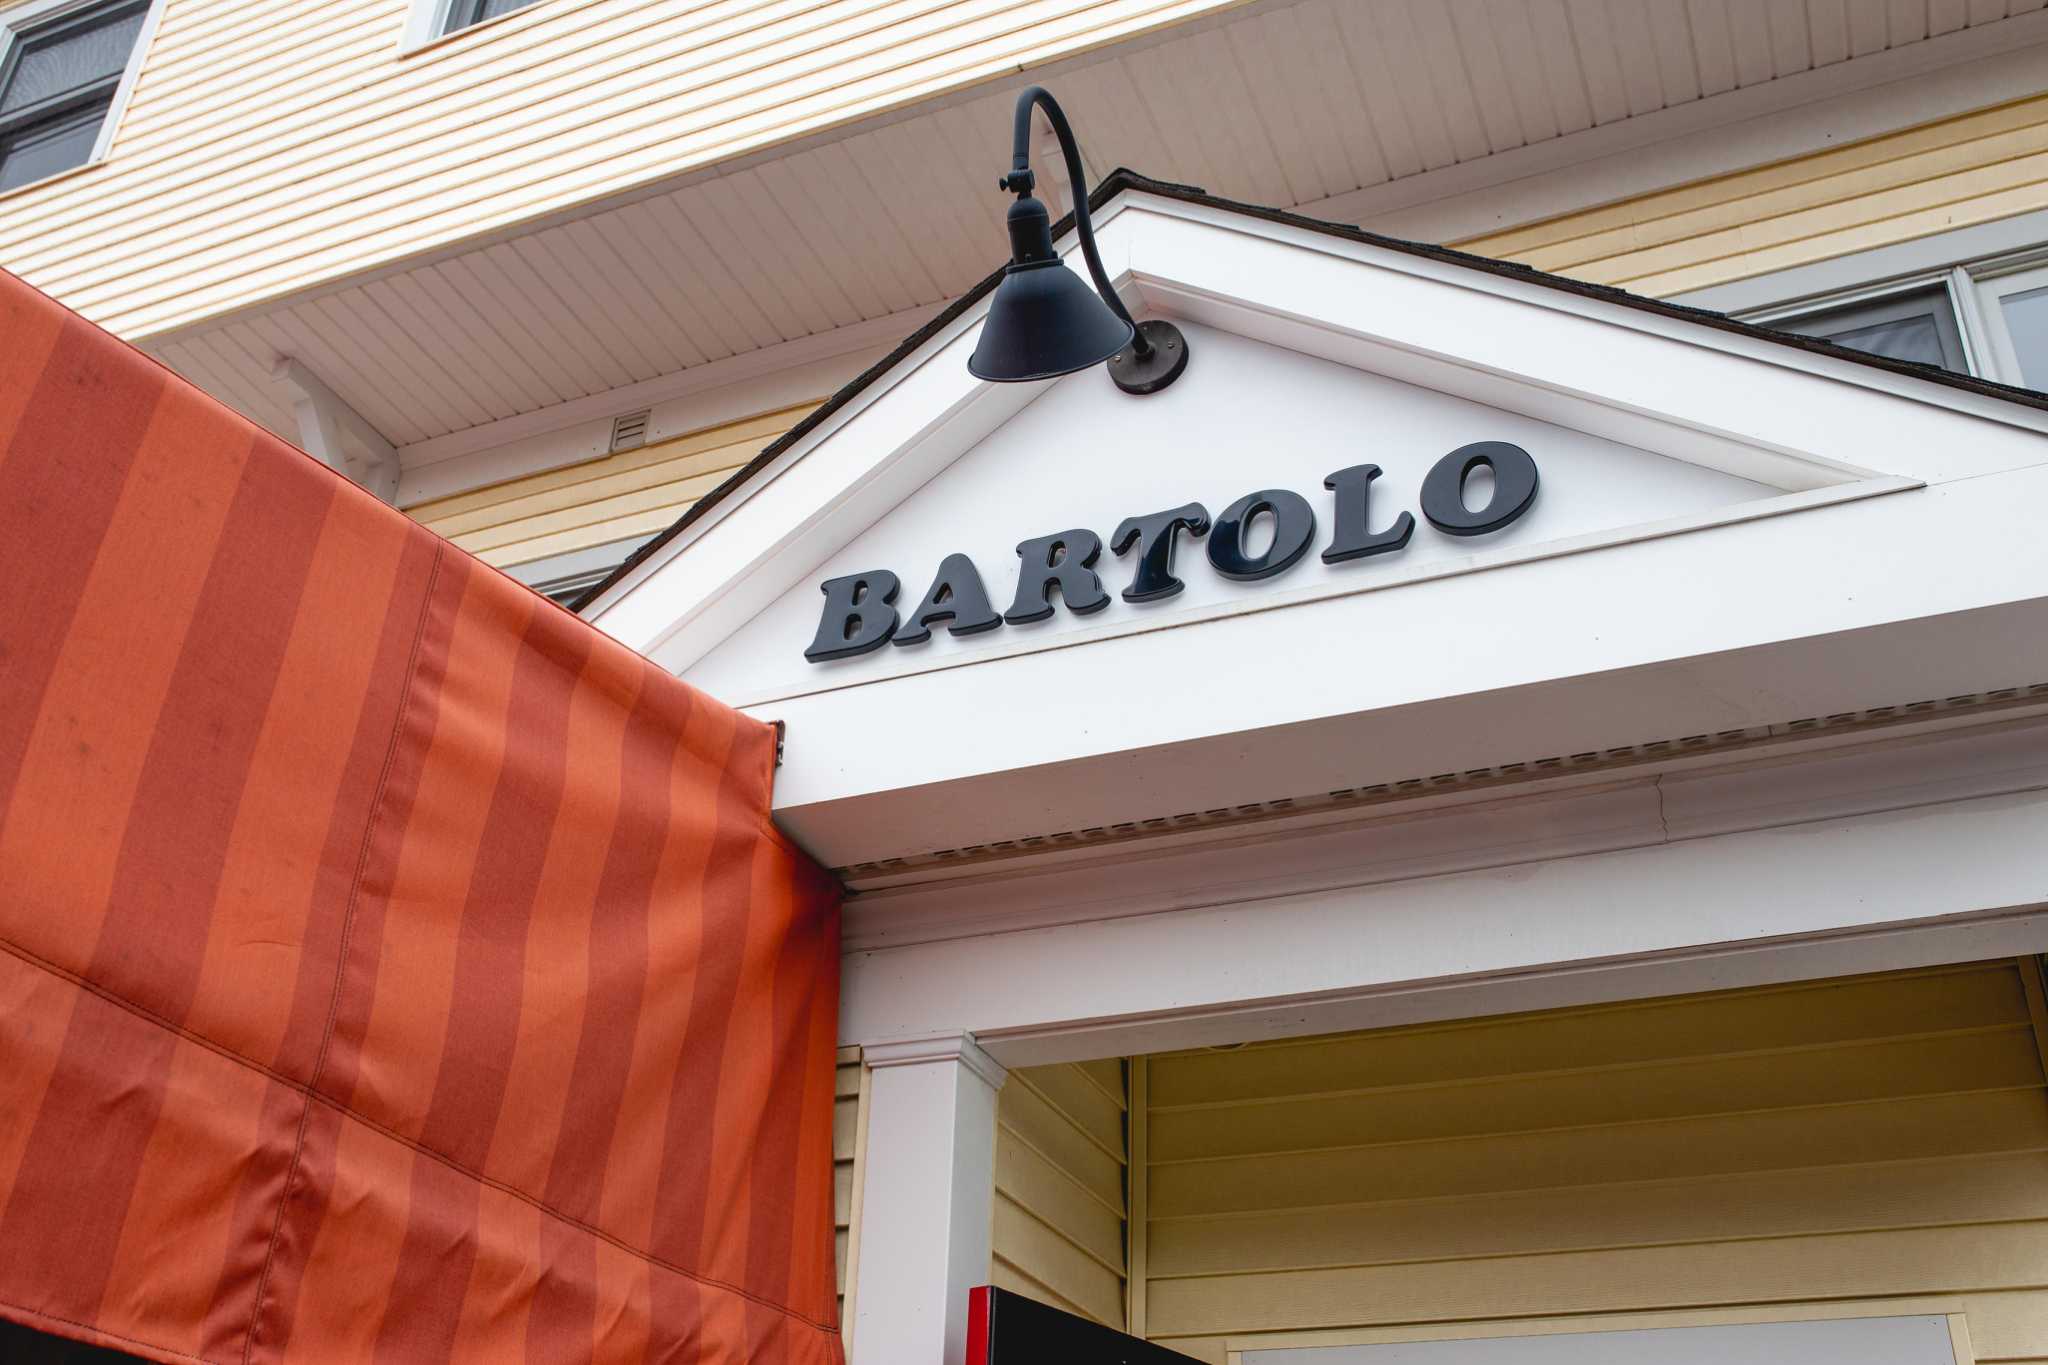 After 12 years, Bartolo Ridgefield, an Italian restaurant, to close: To 'dedicate time' to family